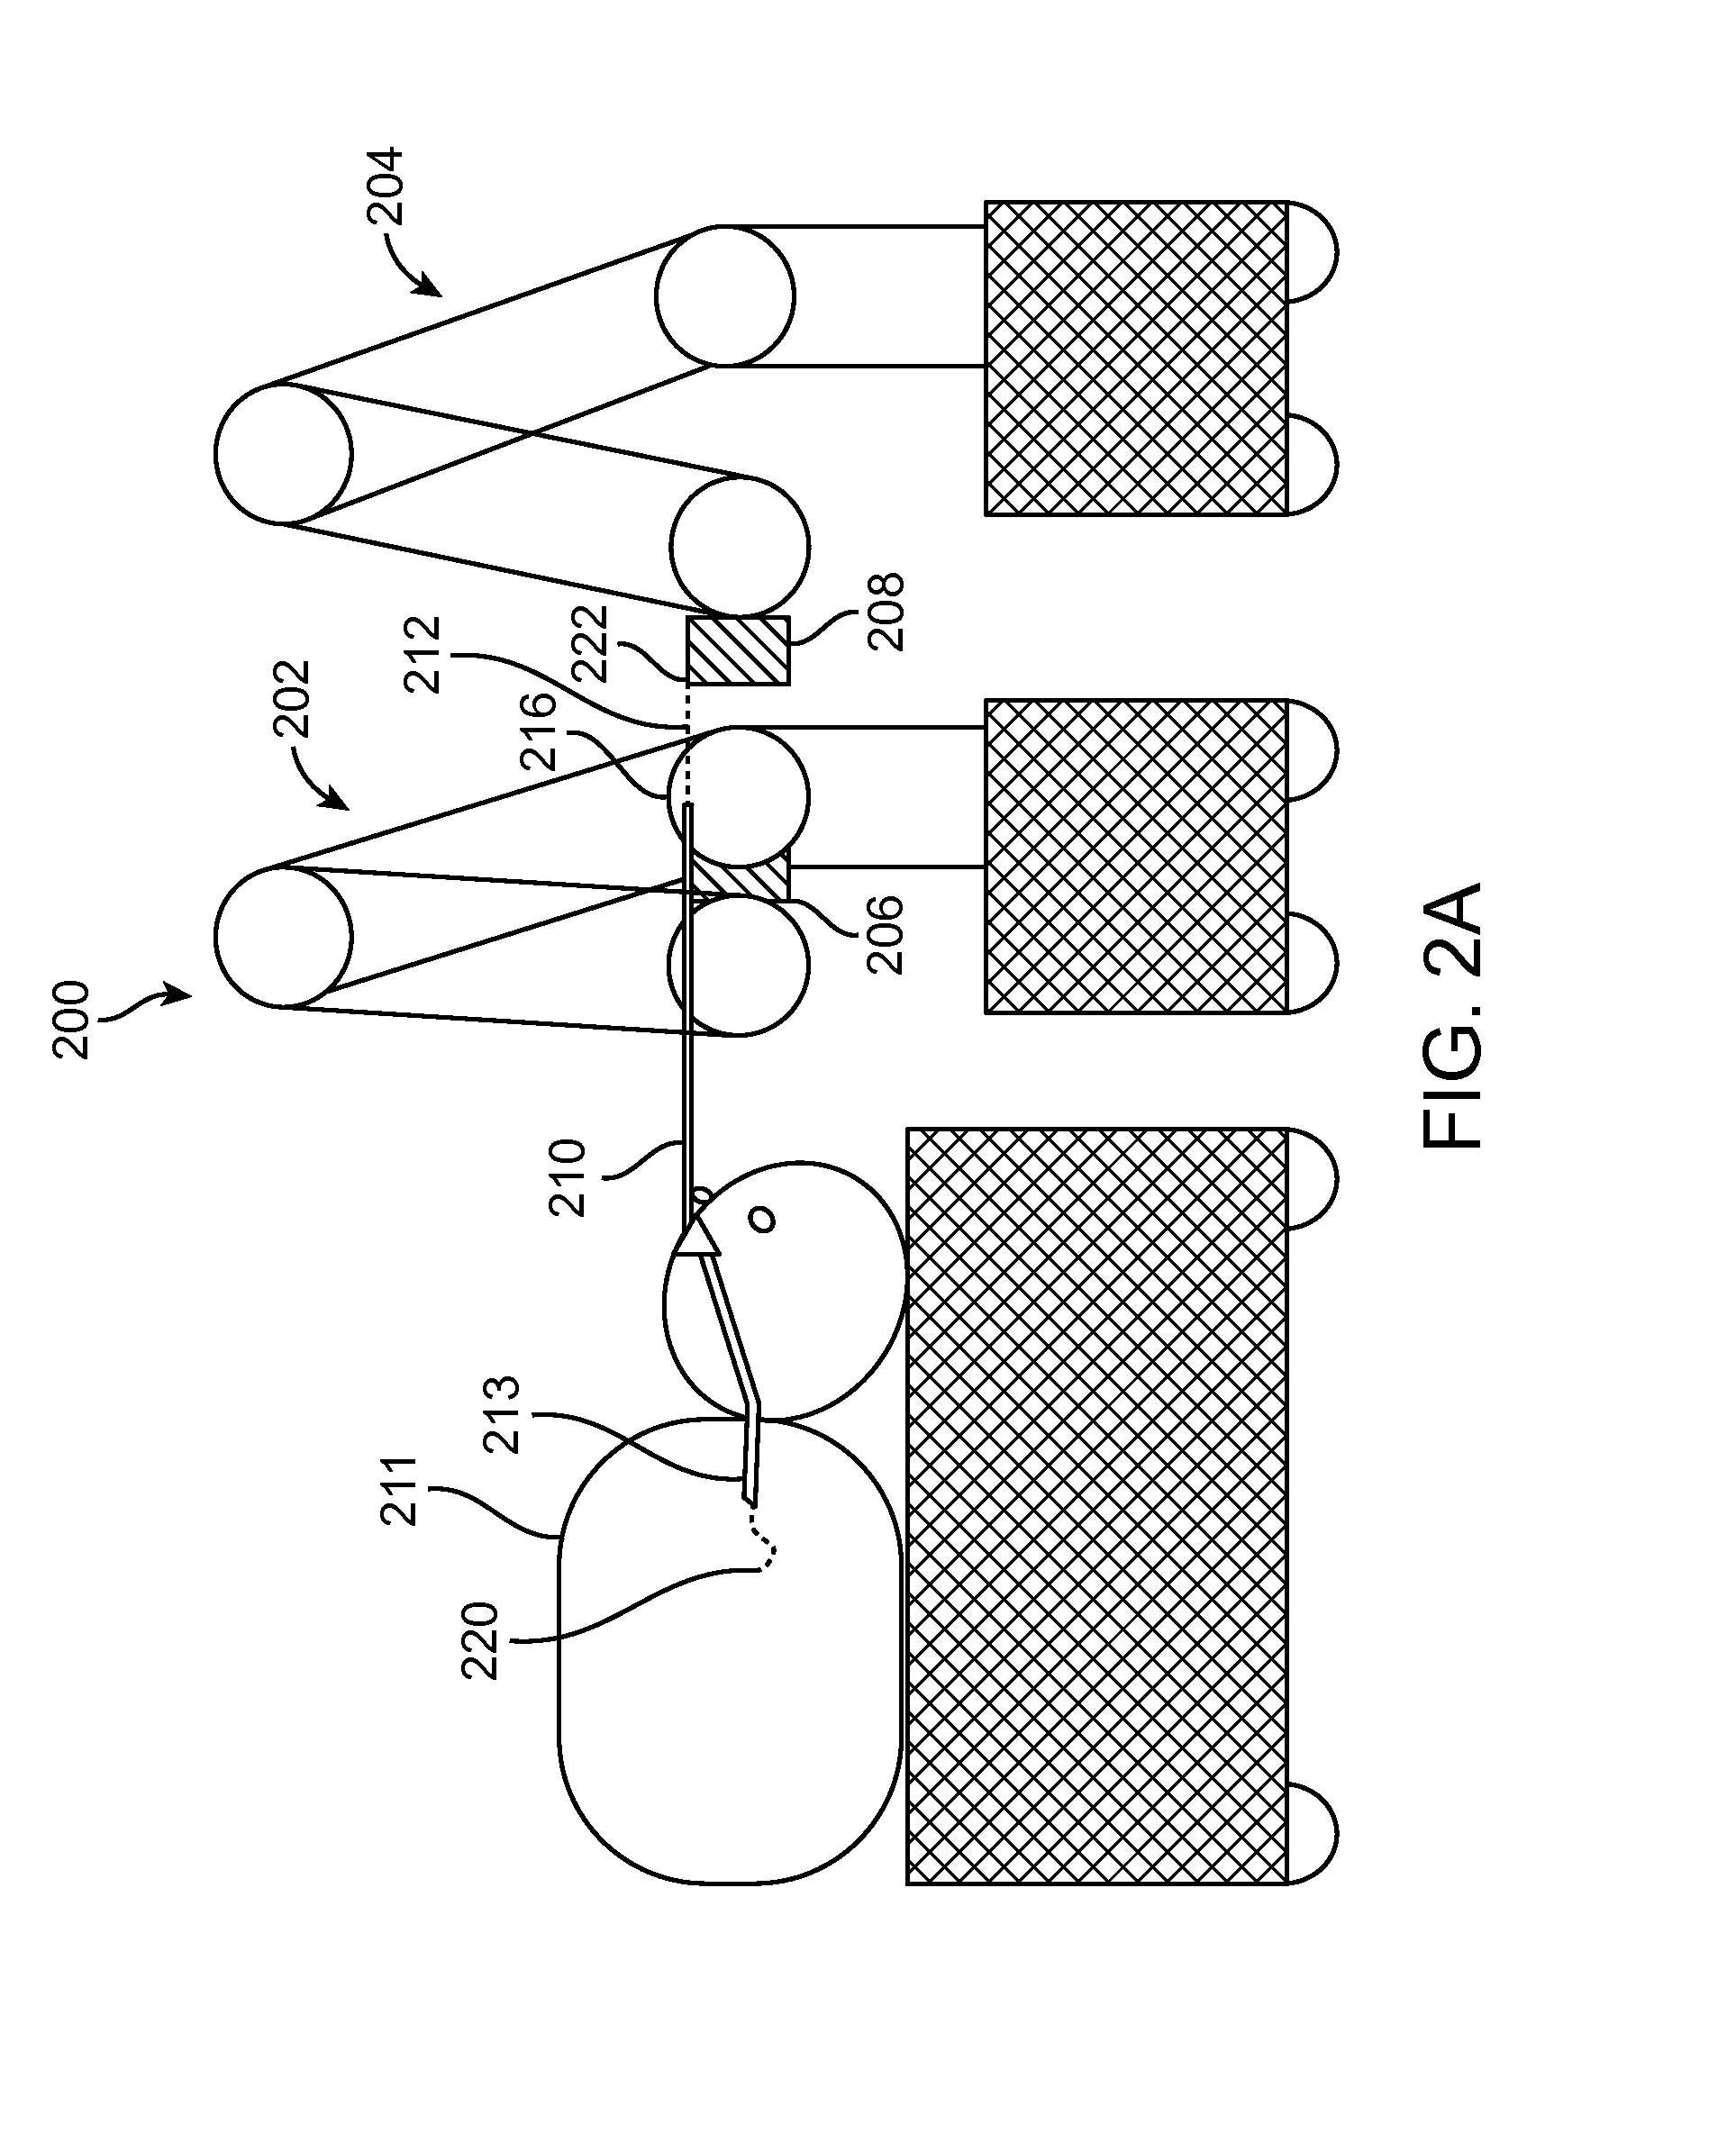 Endoscopic device with helical lumen design